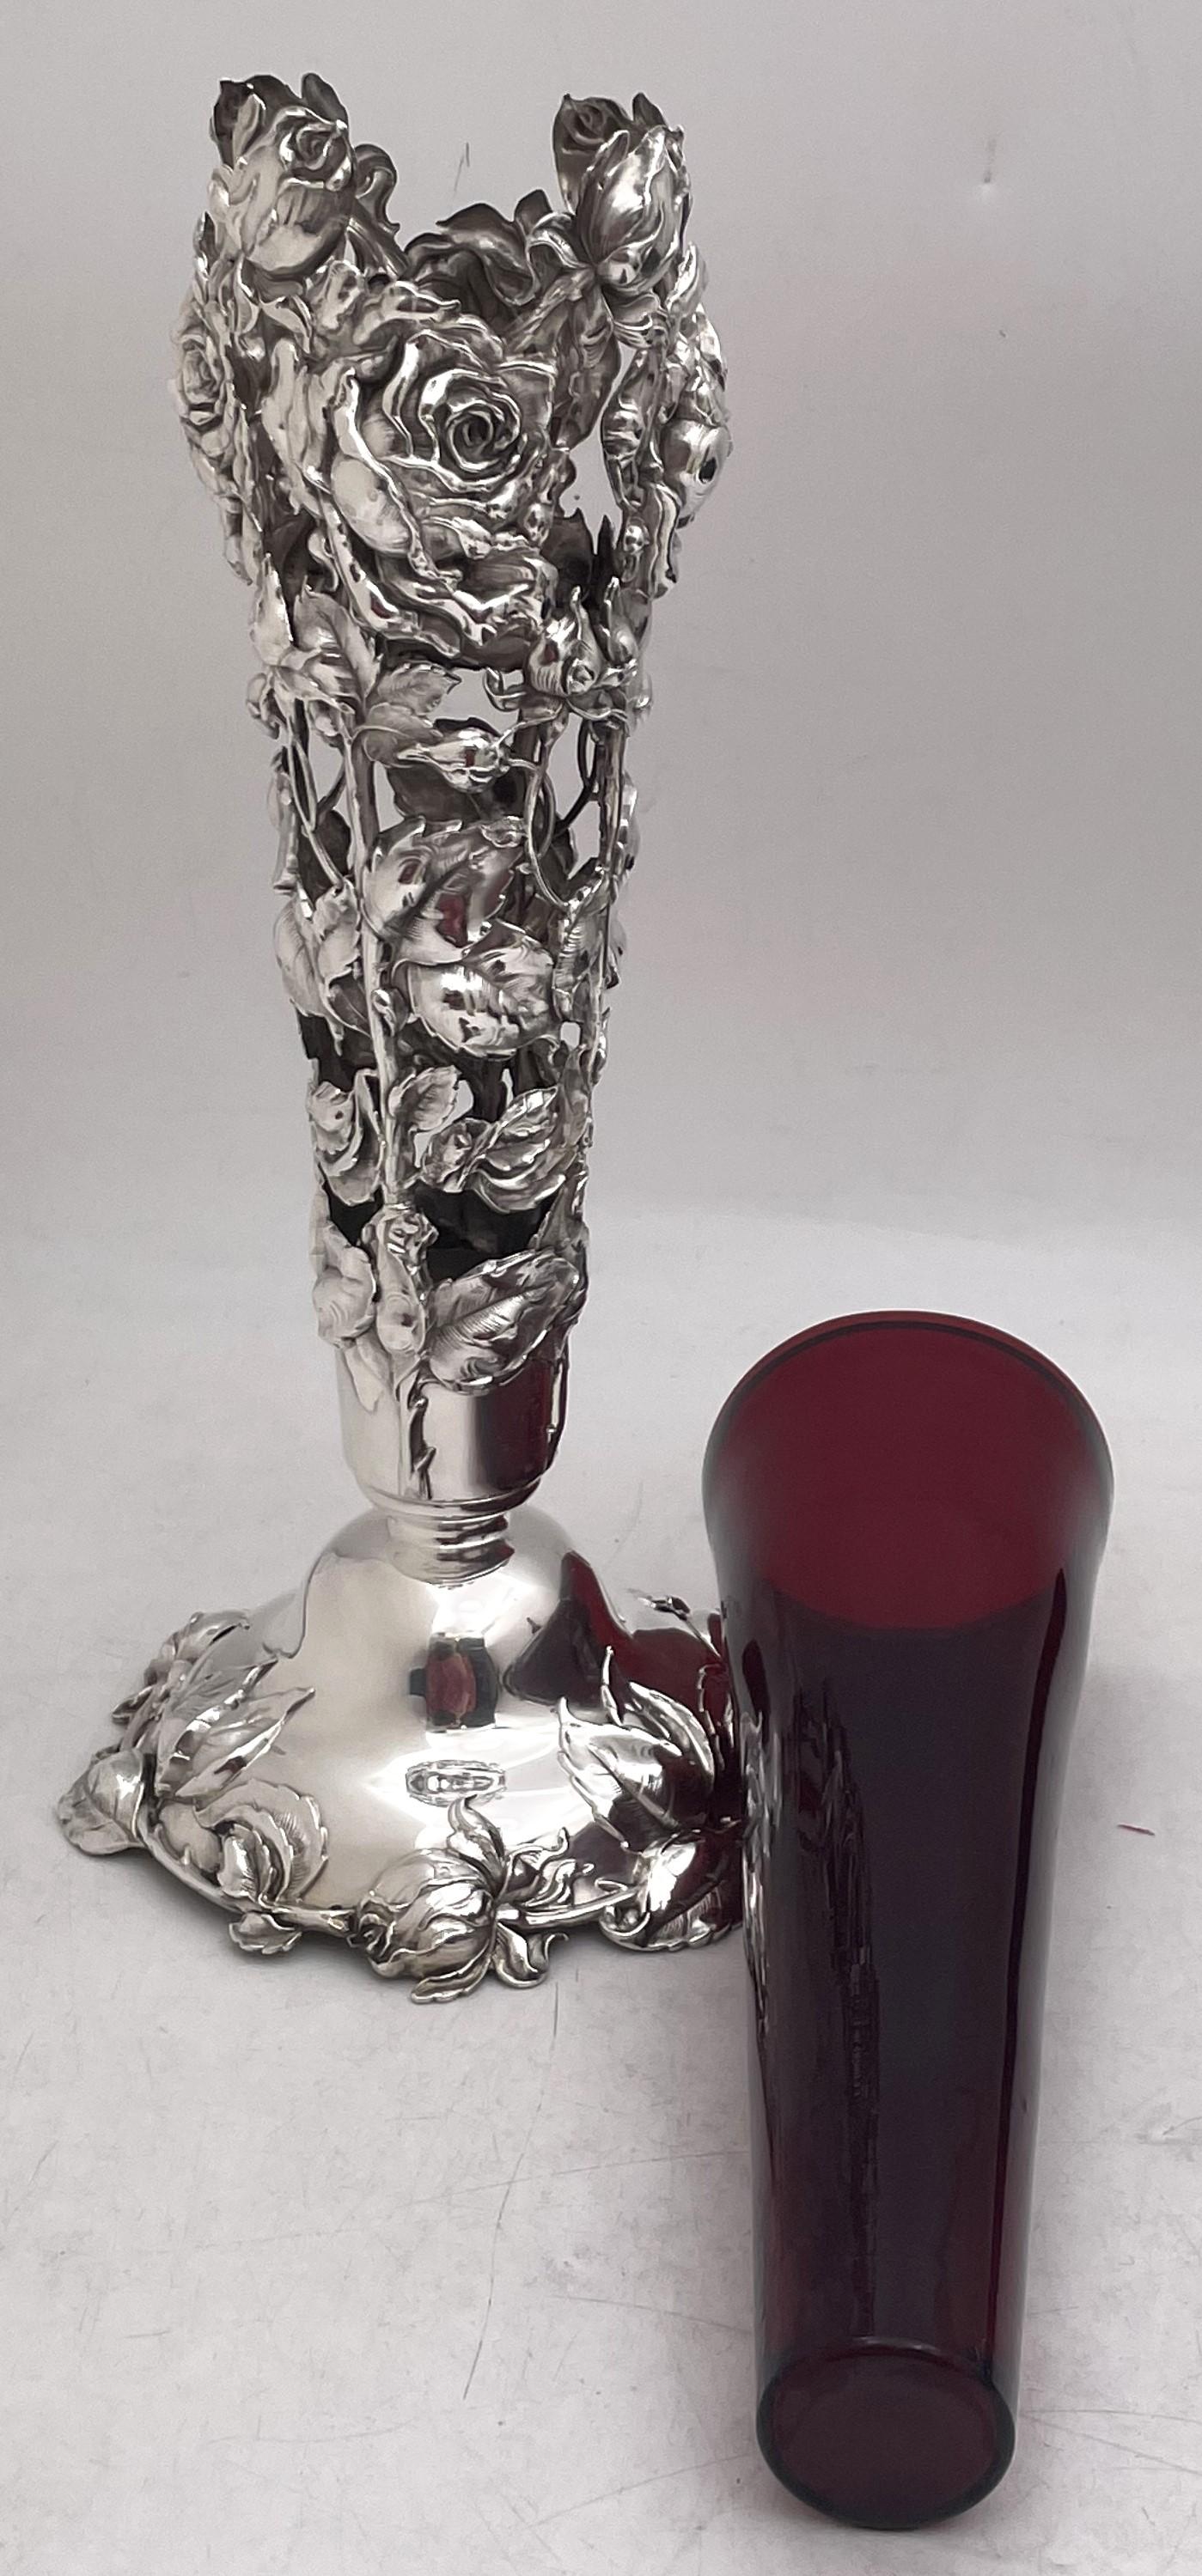  Gorham Sterling Silver Vase in Art Nouveau Style with Dimensional Flowers For Sale 3